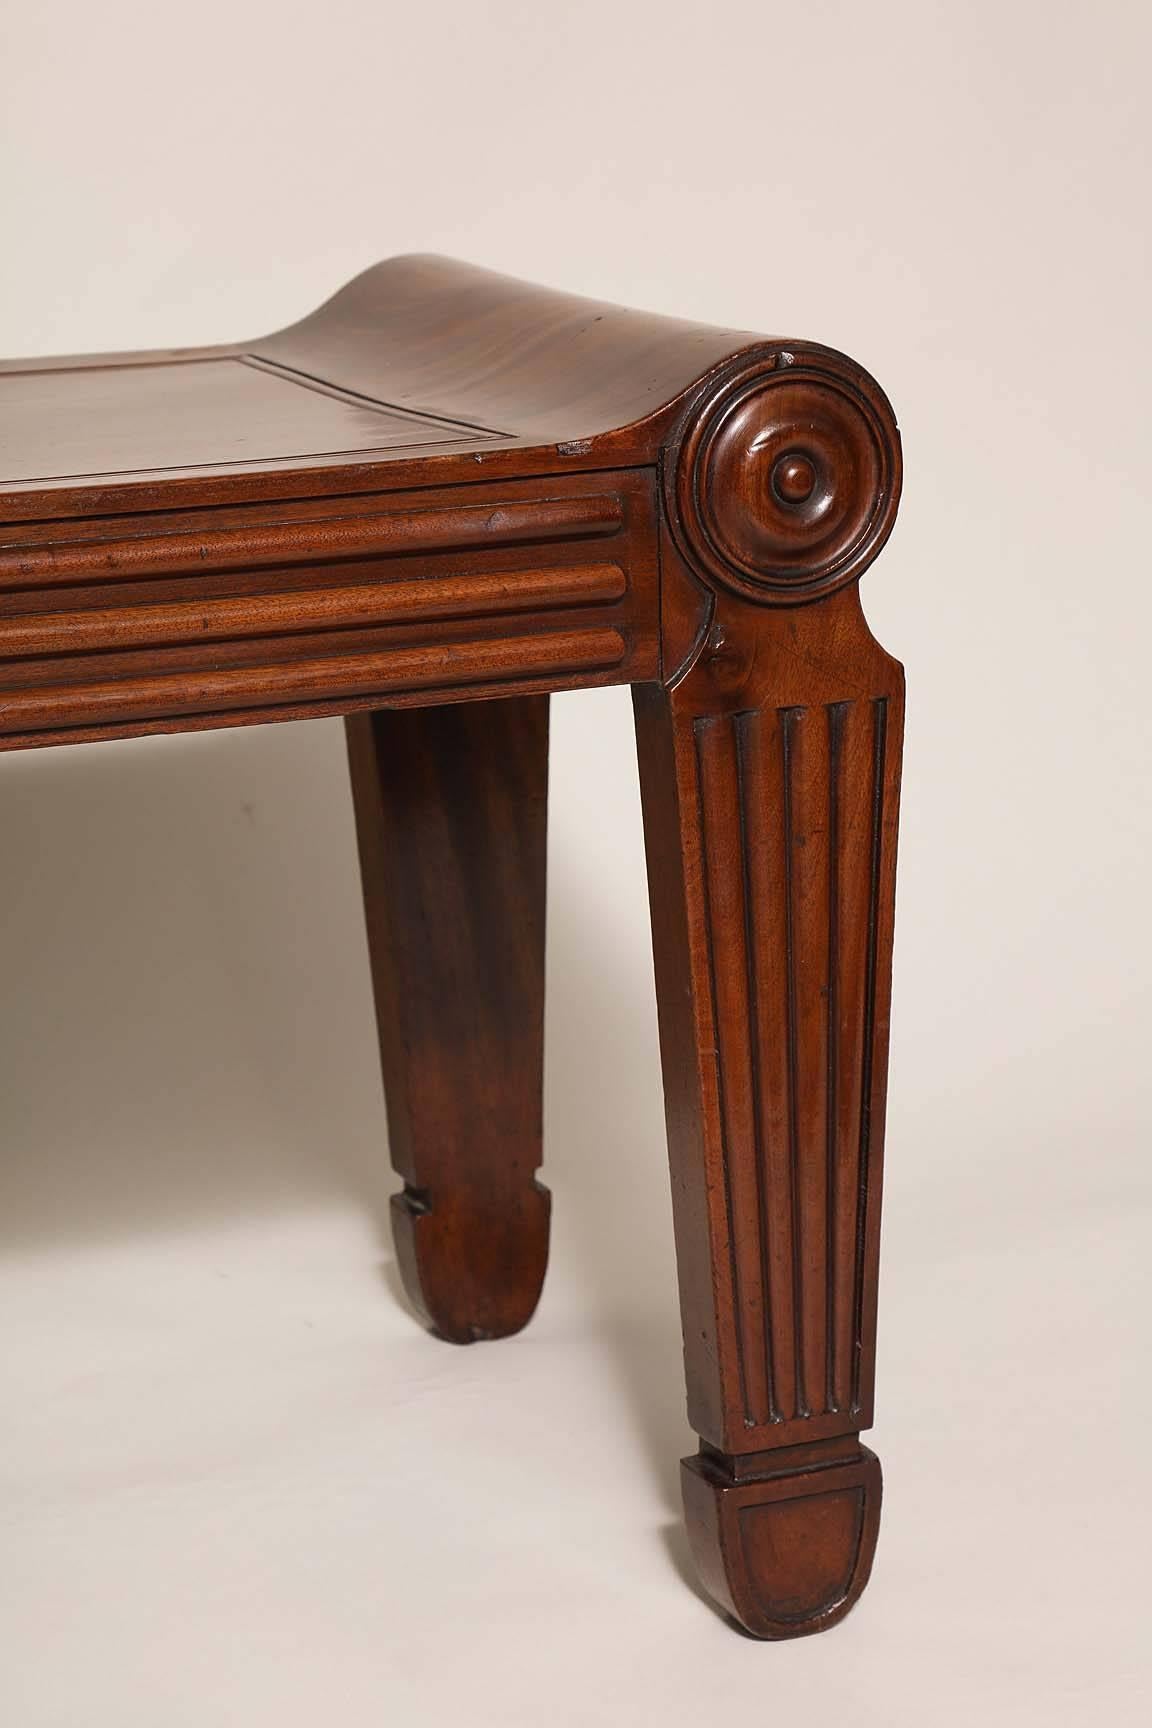 Very fine Regency period mahogany hall bench after a design by Charles Heathcote Tatham, seat with molded panel, the rolled ends over rib molded silhouette legs, the whole in well patinated and richly grained timber.

This design was based on an